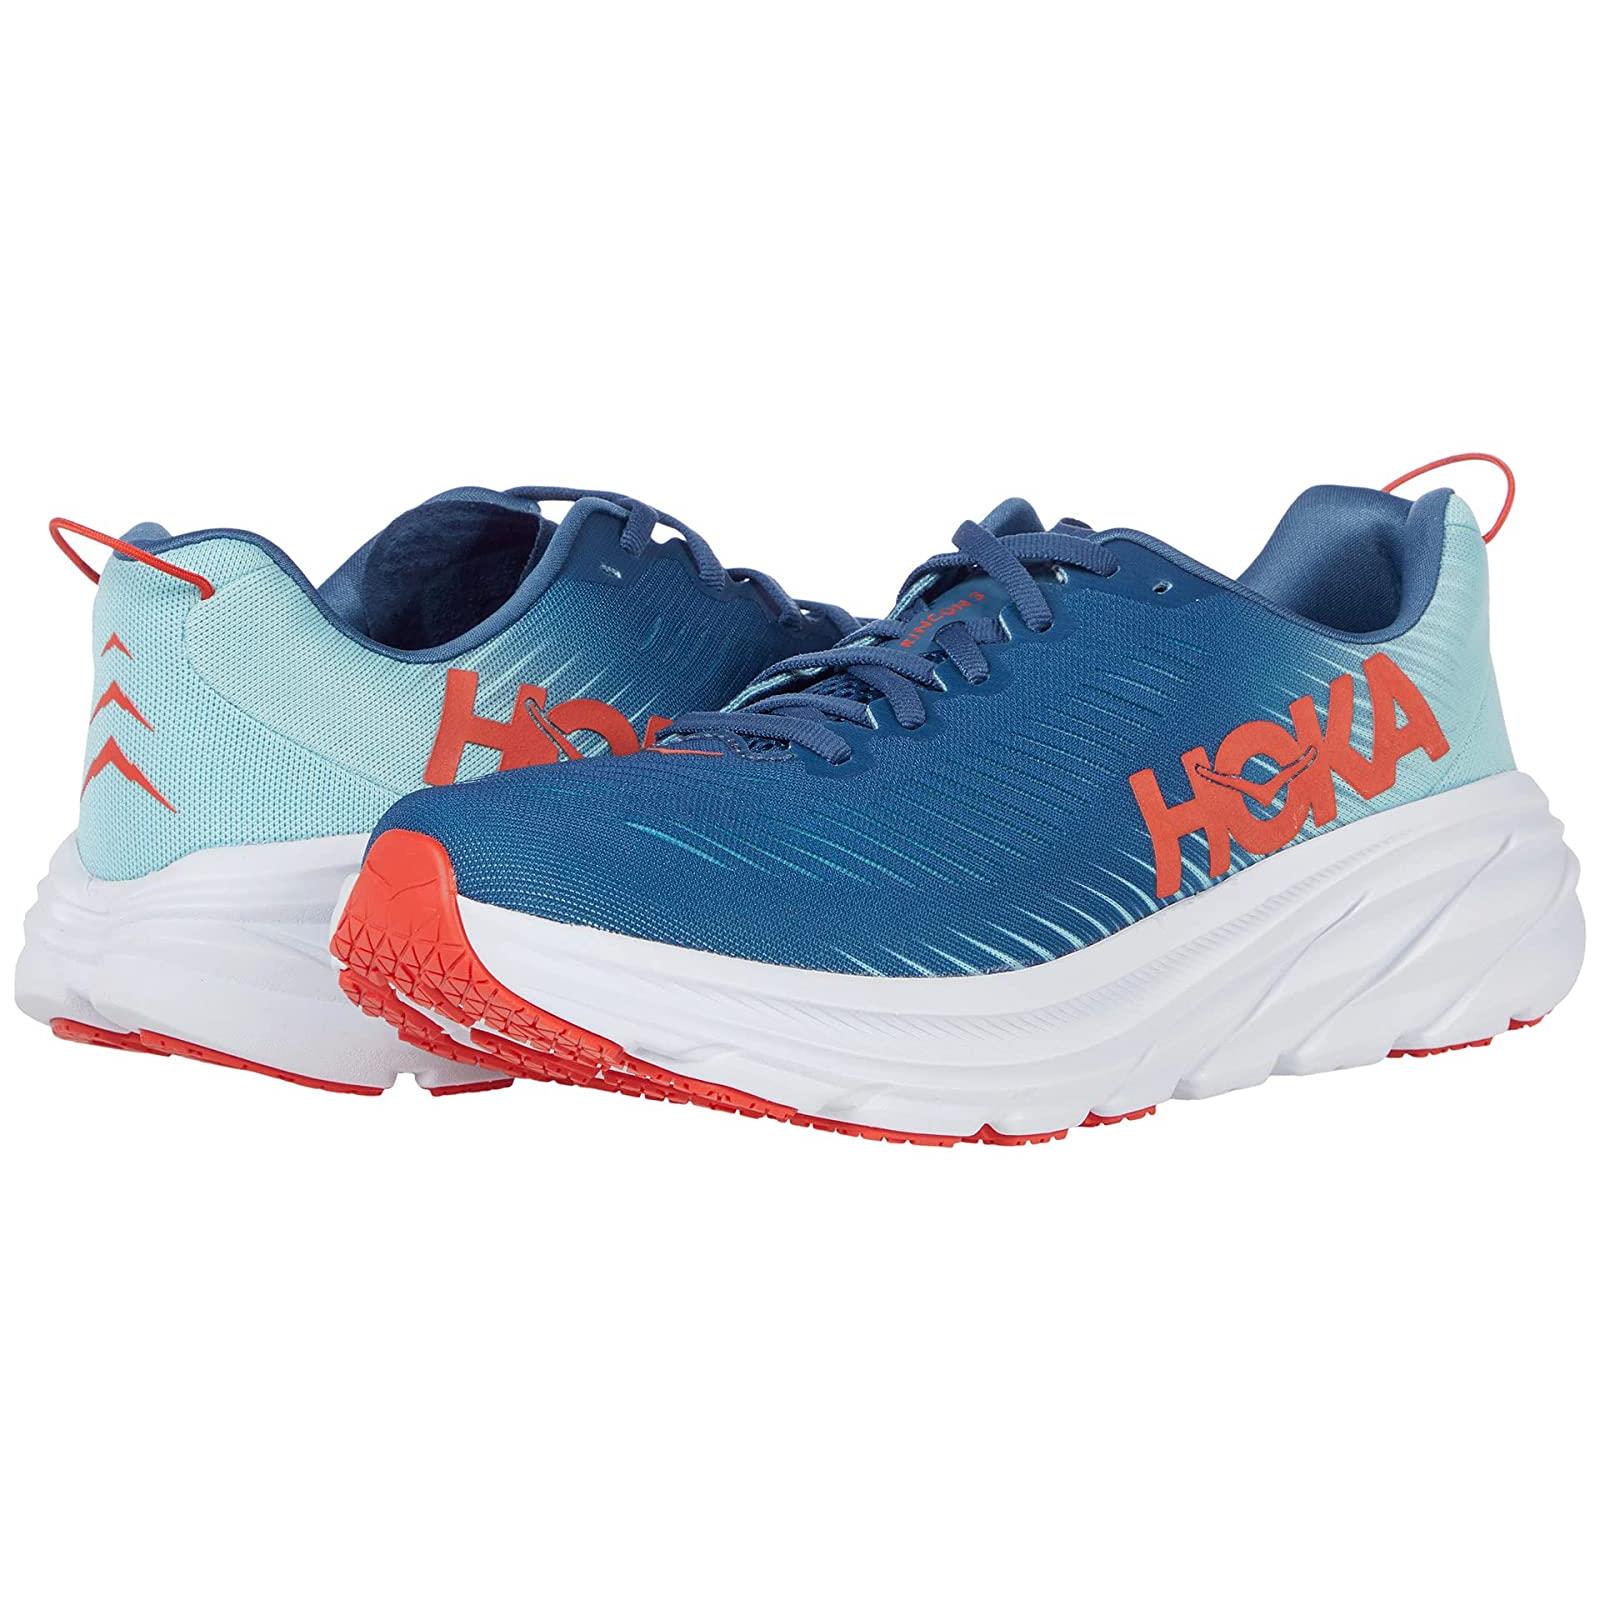 Man`s Sneakers Athletic Shoes Hoka One One Rincon 3 Real Teal/Eggshell Blue